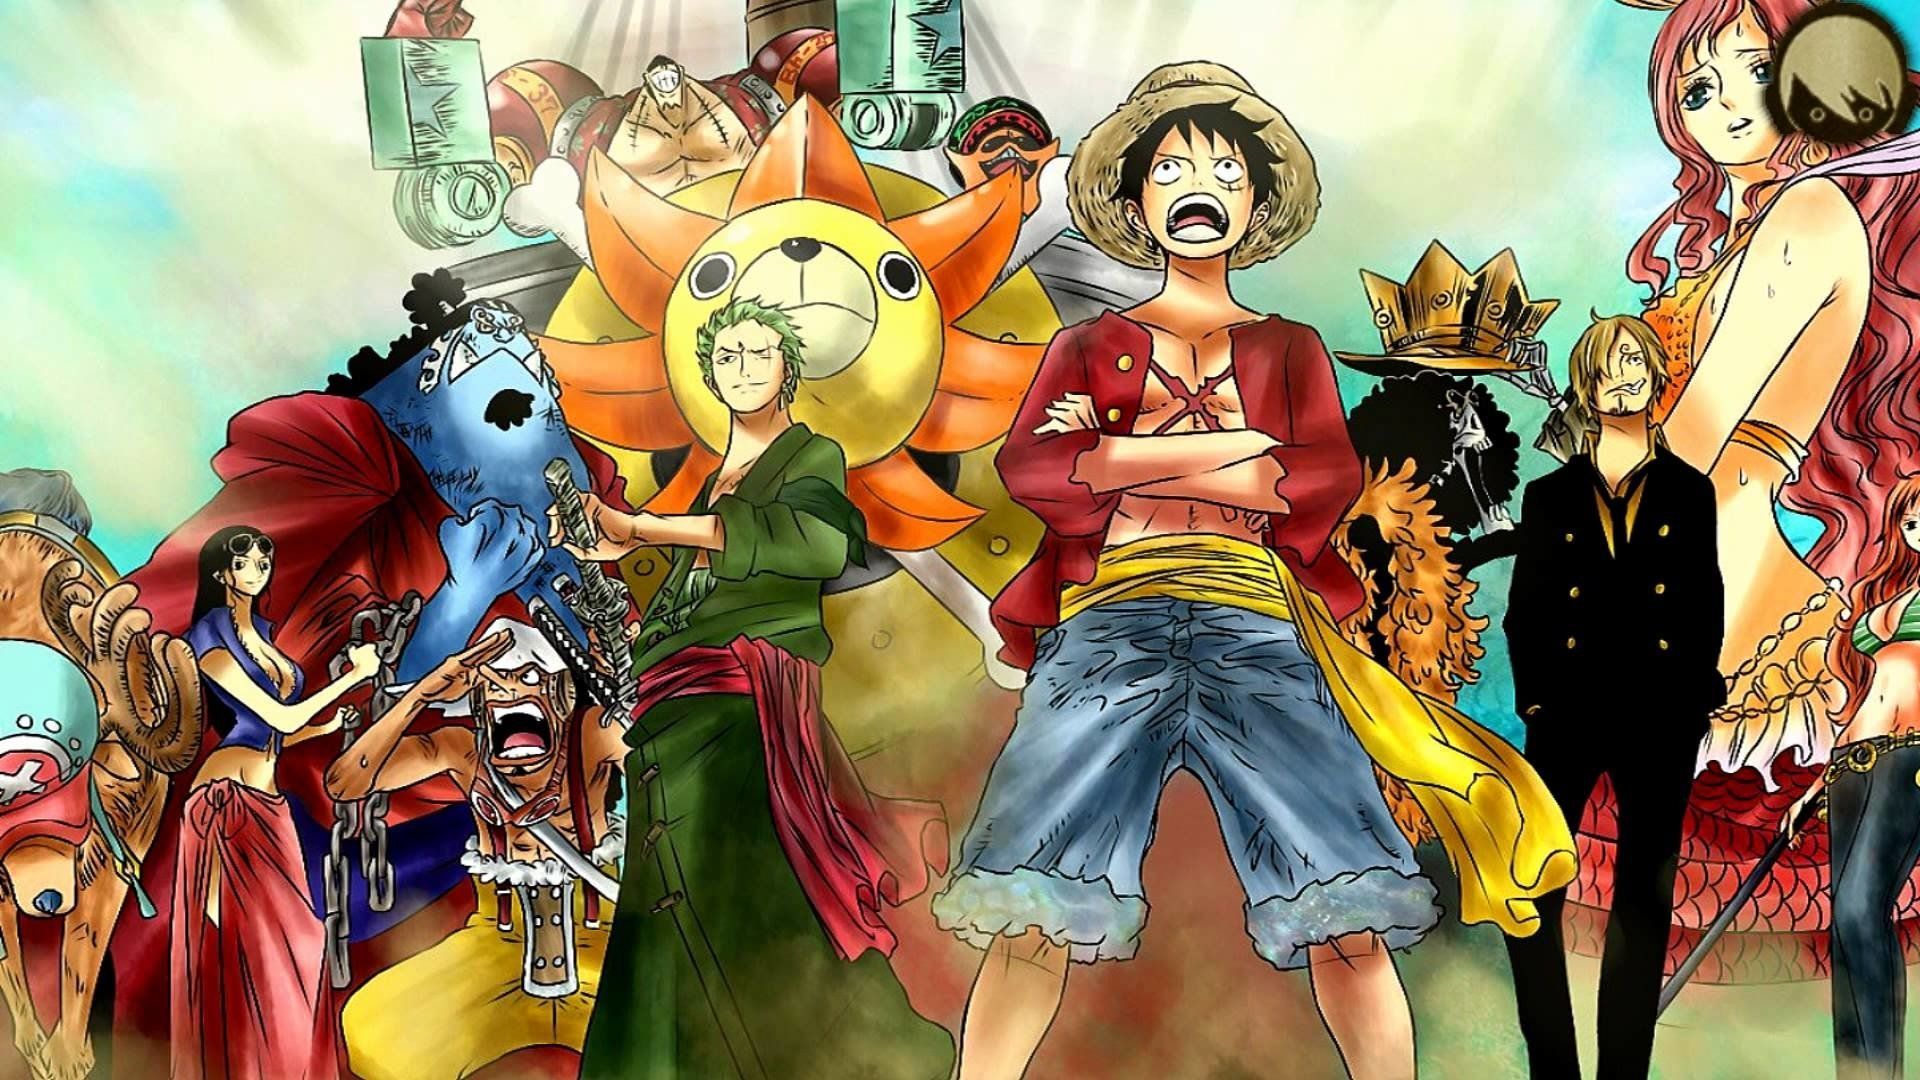 The straw hat crew Wallpaper Background Image. View, download, comment, and rate. Brooks one piece, Anime, Anime island